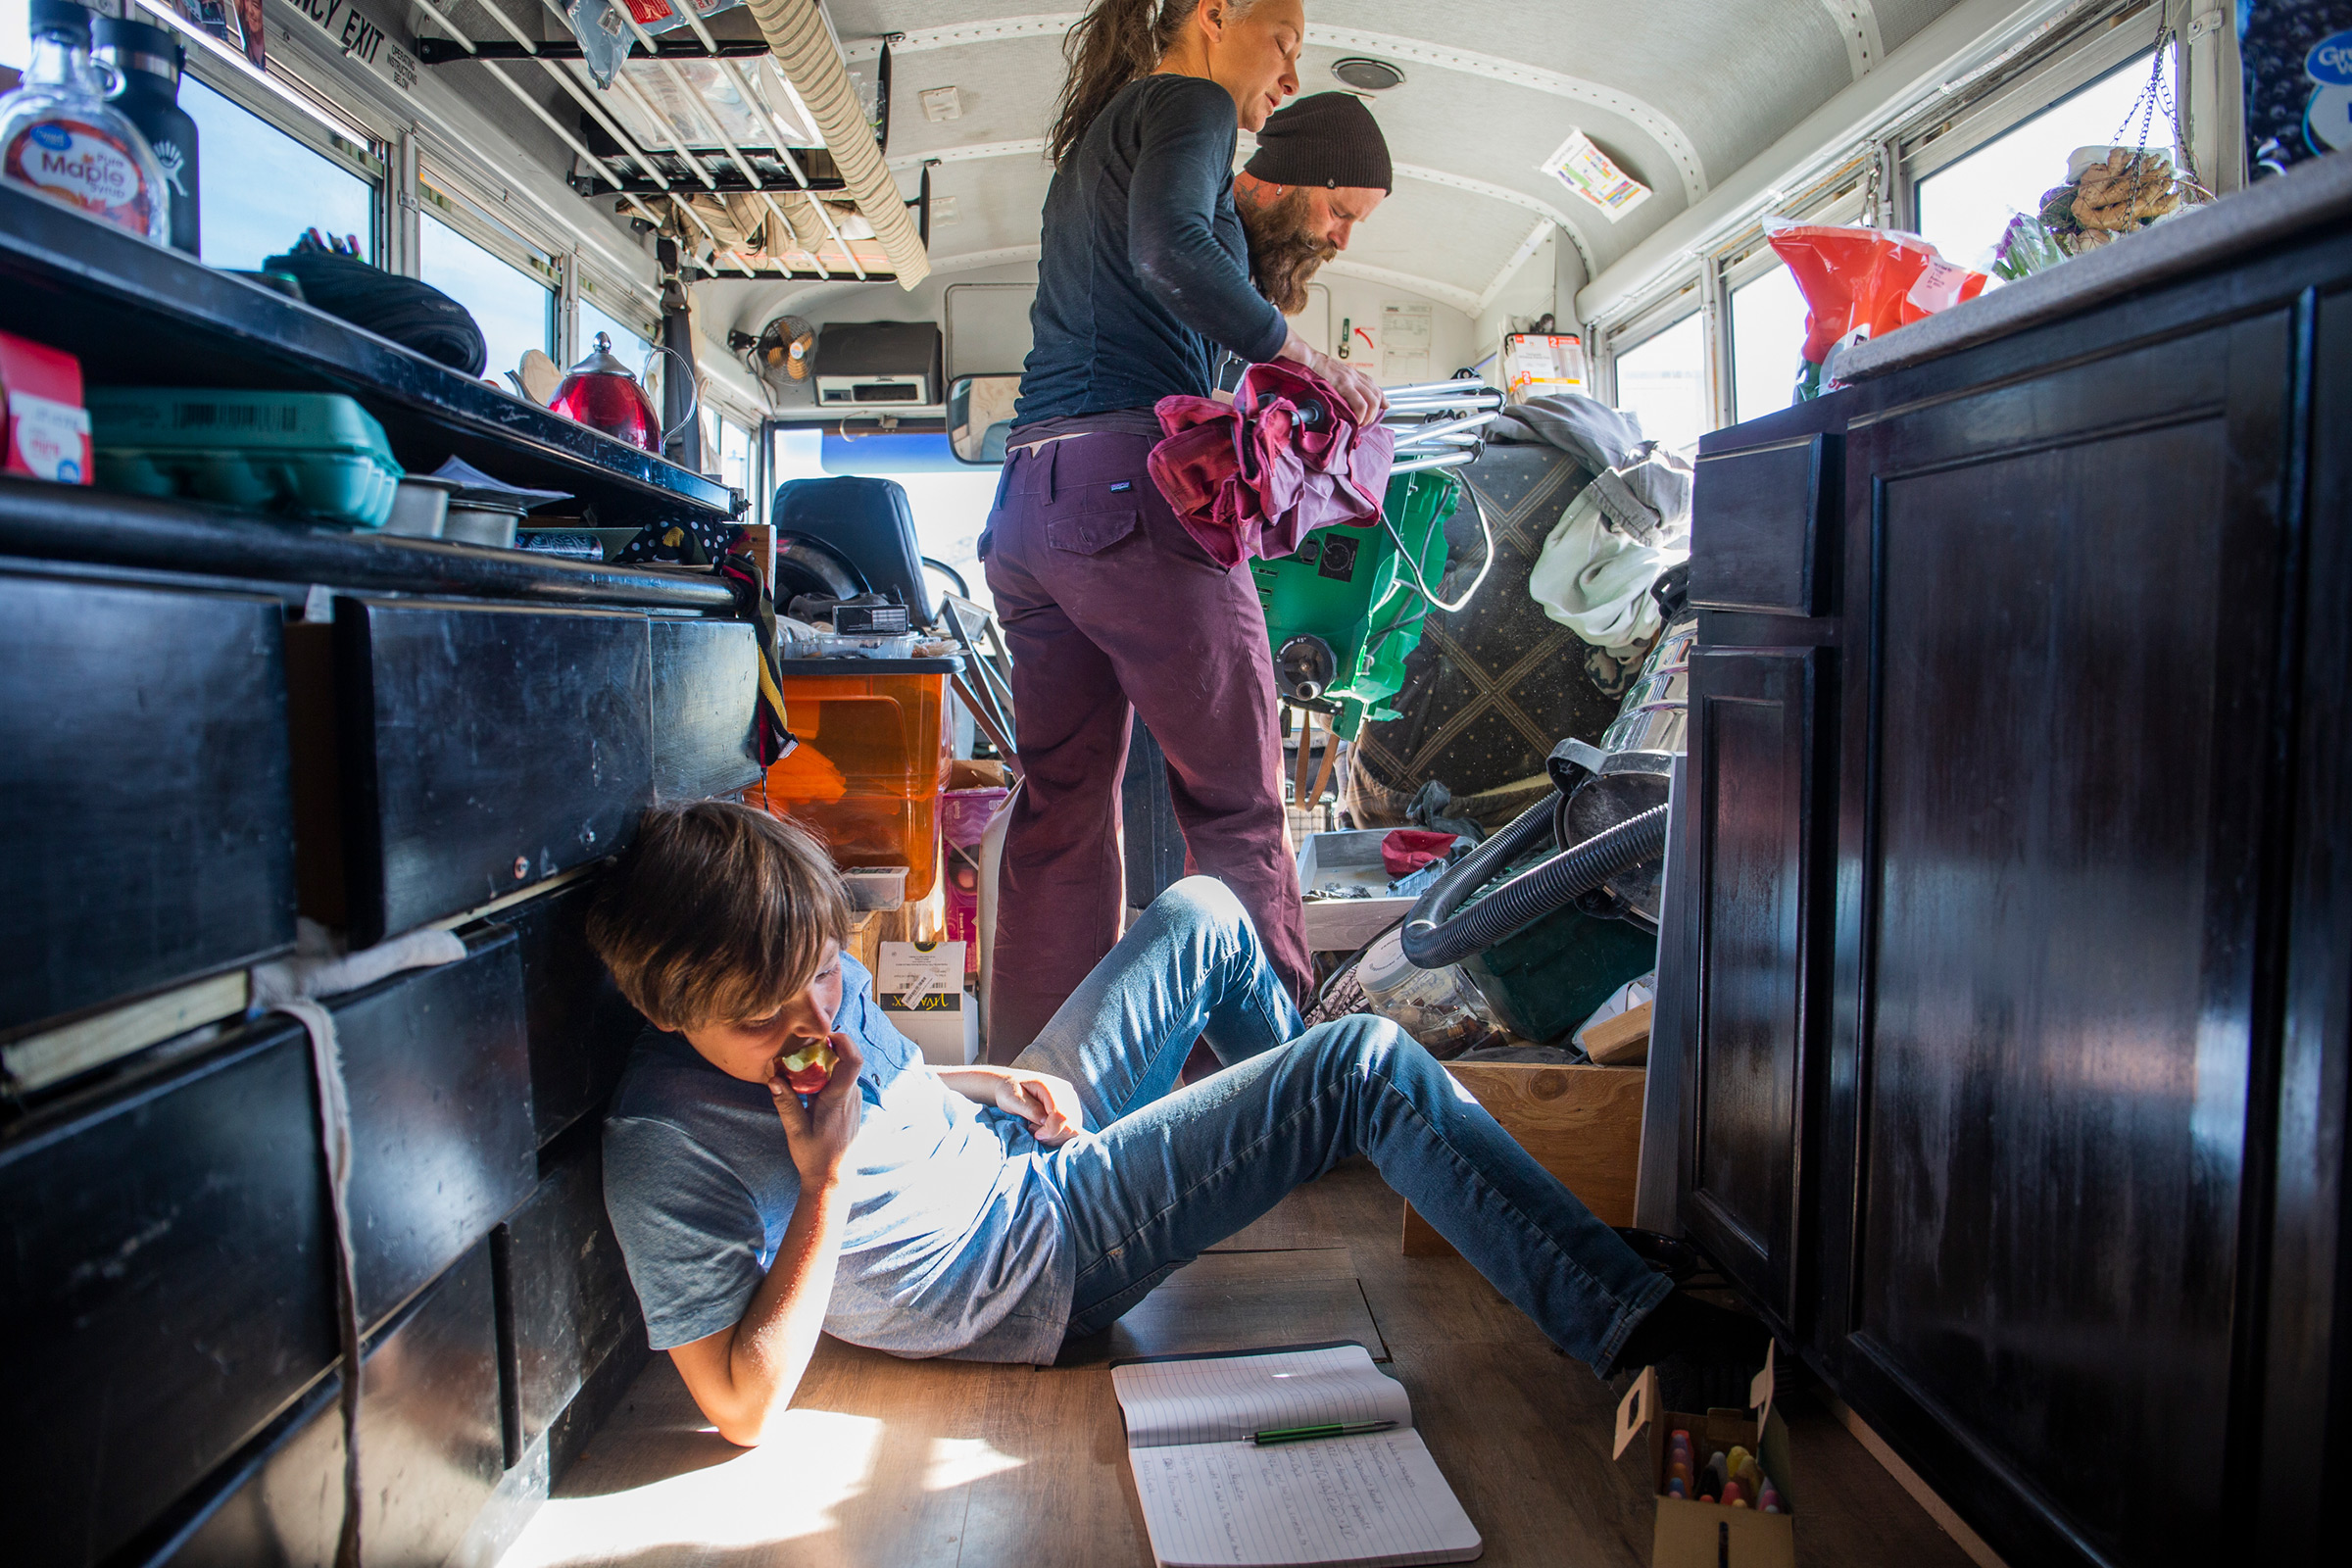 Max works on chemistry schoolwork on the floor of the bus, while Paula lends her table saw to a neighbor to work on his own bus on Feb. 23.